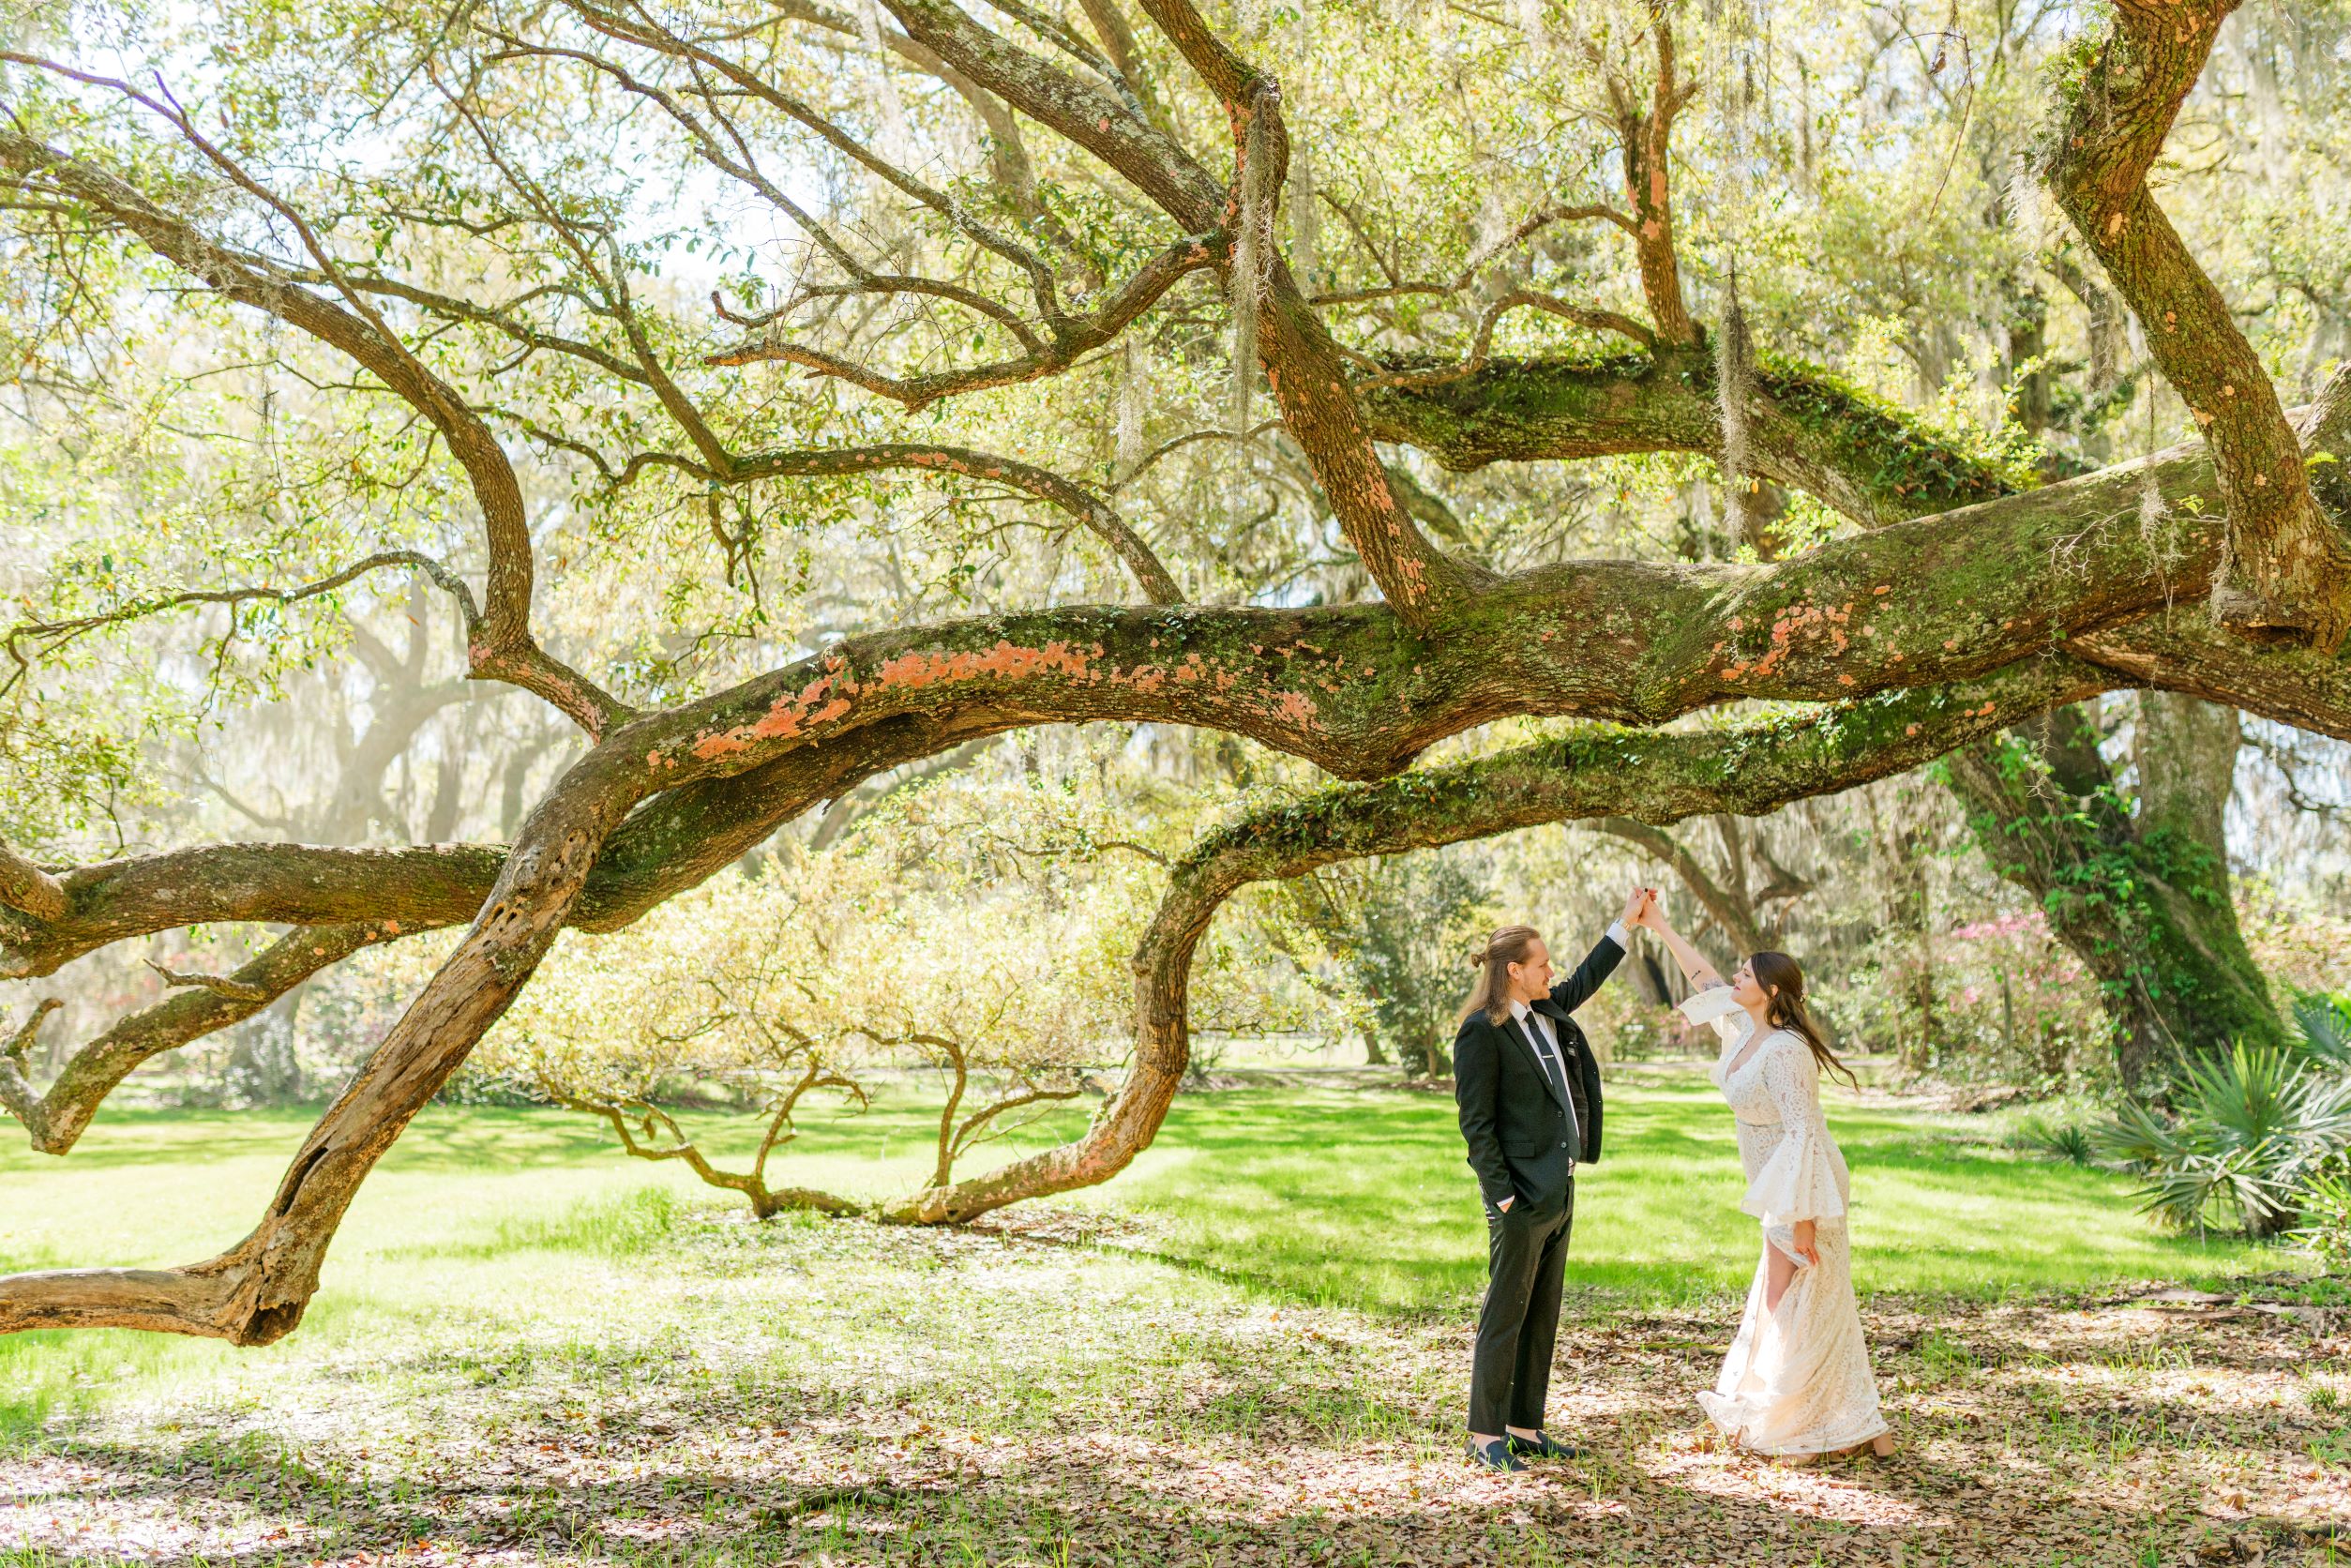 Kyle spins Paige underneath a large oak covered with spanish moss. The tree is so large that the branches spill down onto the ground